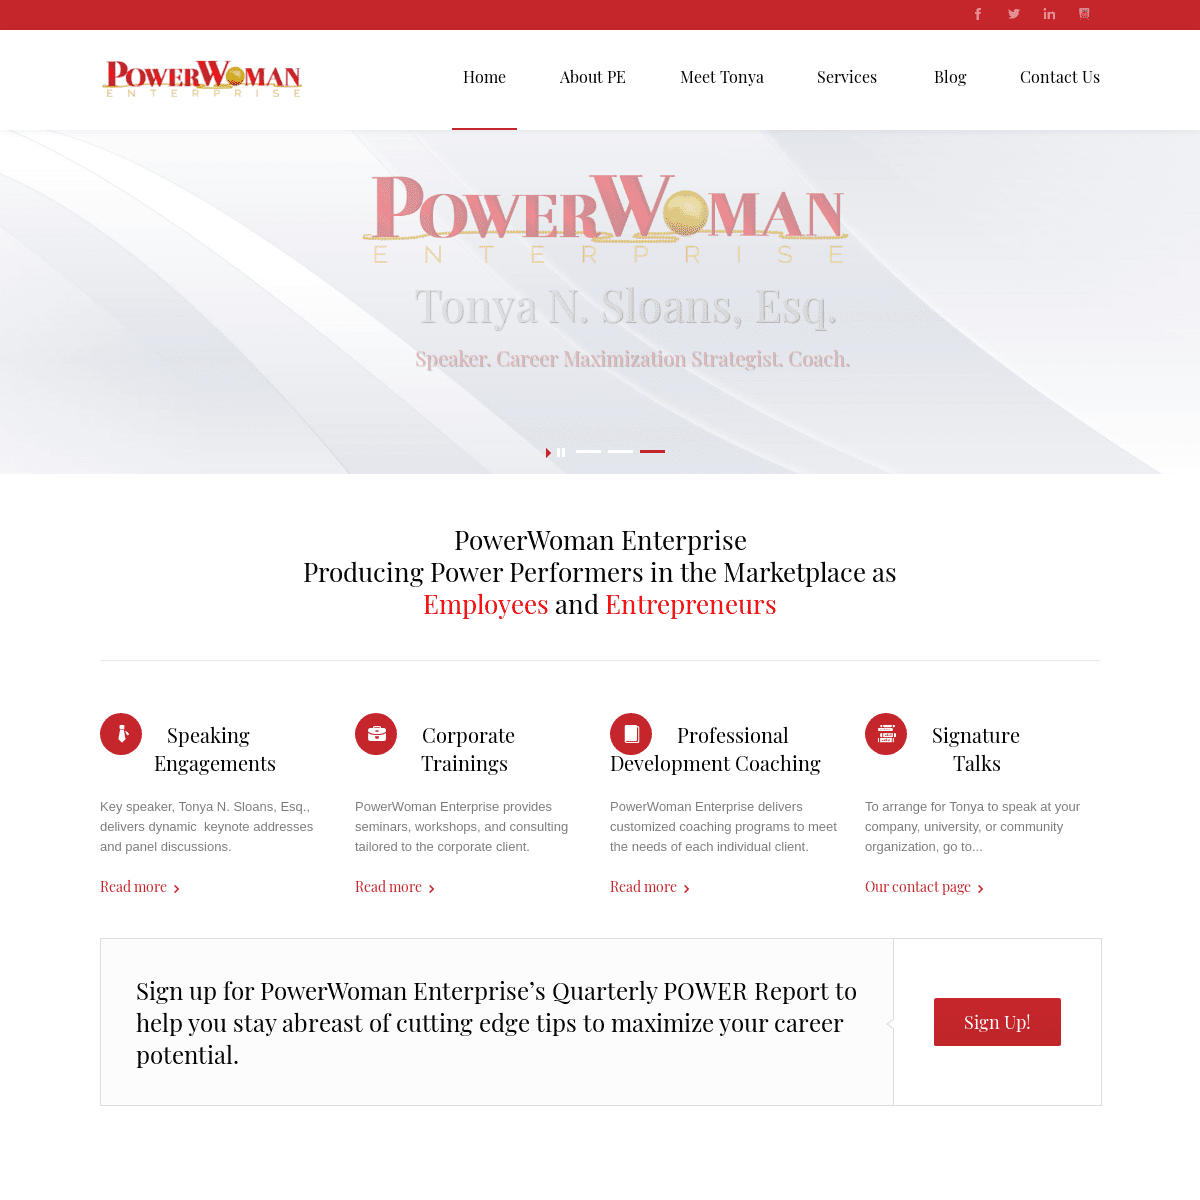 A complete backup of https://iampowerwoman.com